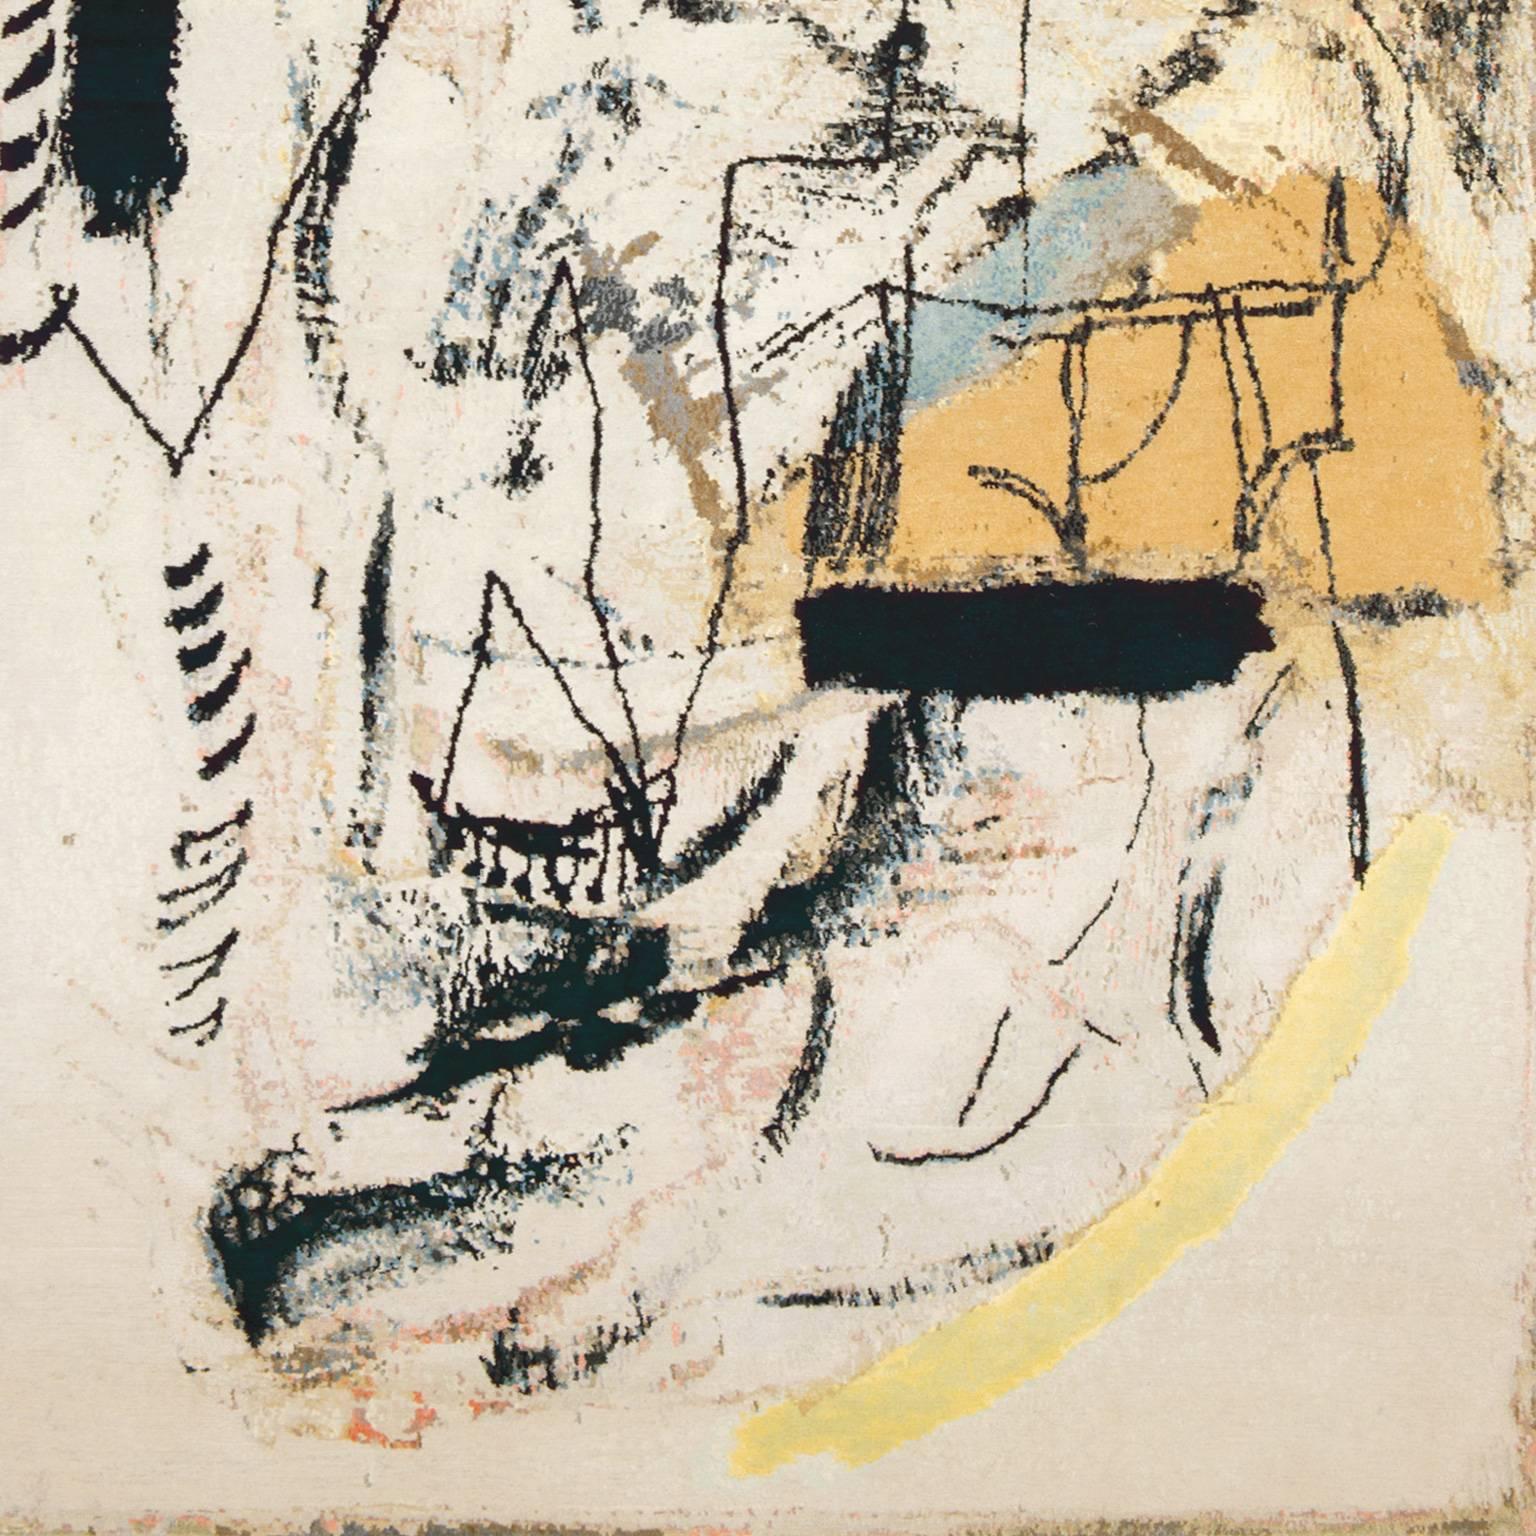 'Bell and Chime' by the St Ives based artist Arthur Lanyon is another outstanding piece in the new Knots Artist collection ‘Your Floor is the Canvas'. Rich in texture, detail and color, this modernist abstract piece conveys a sense of vibrant